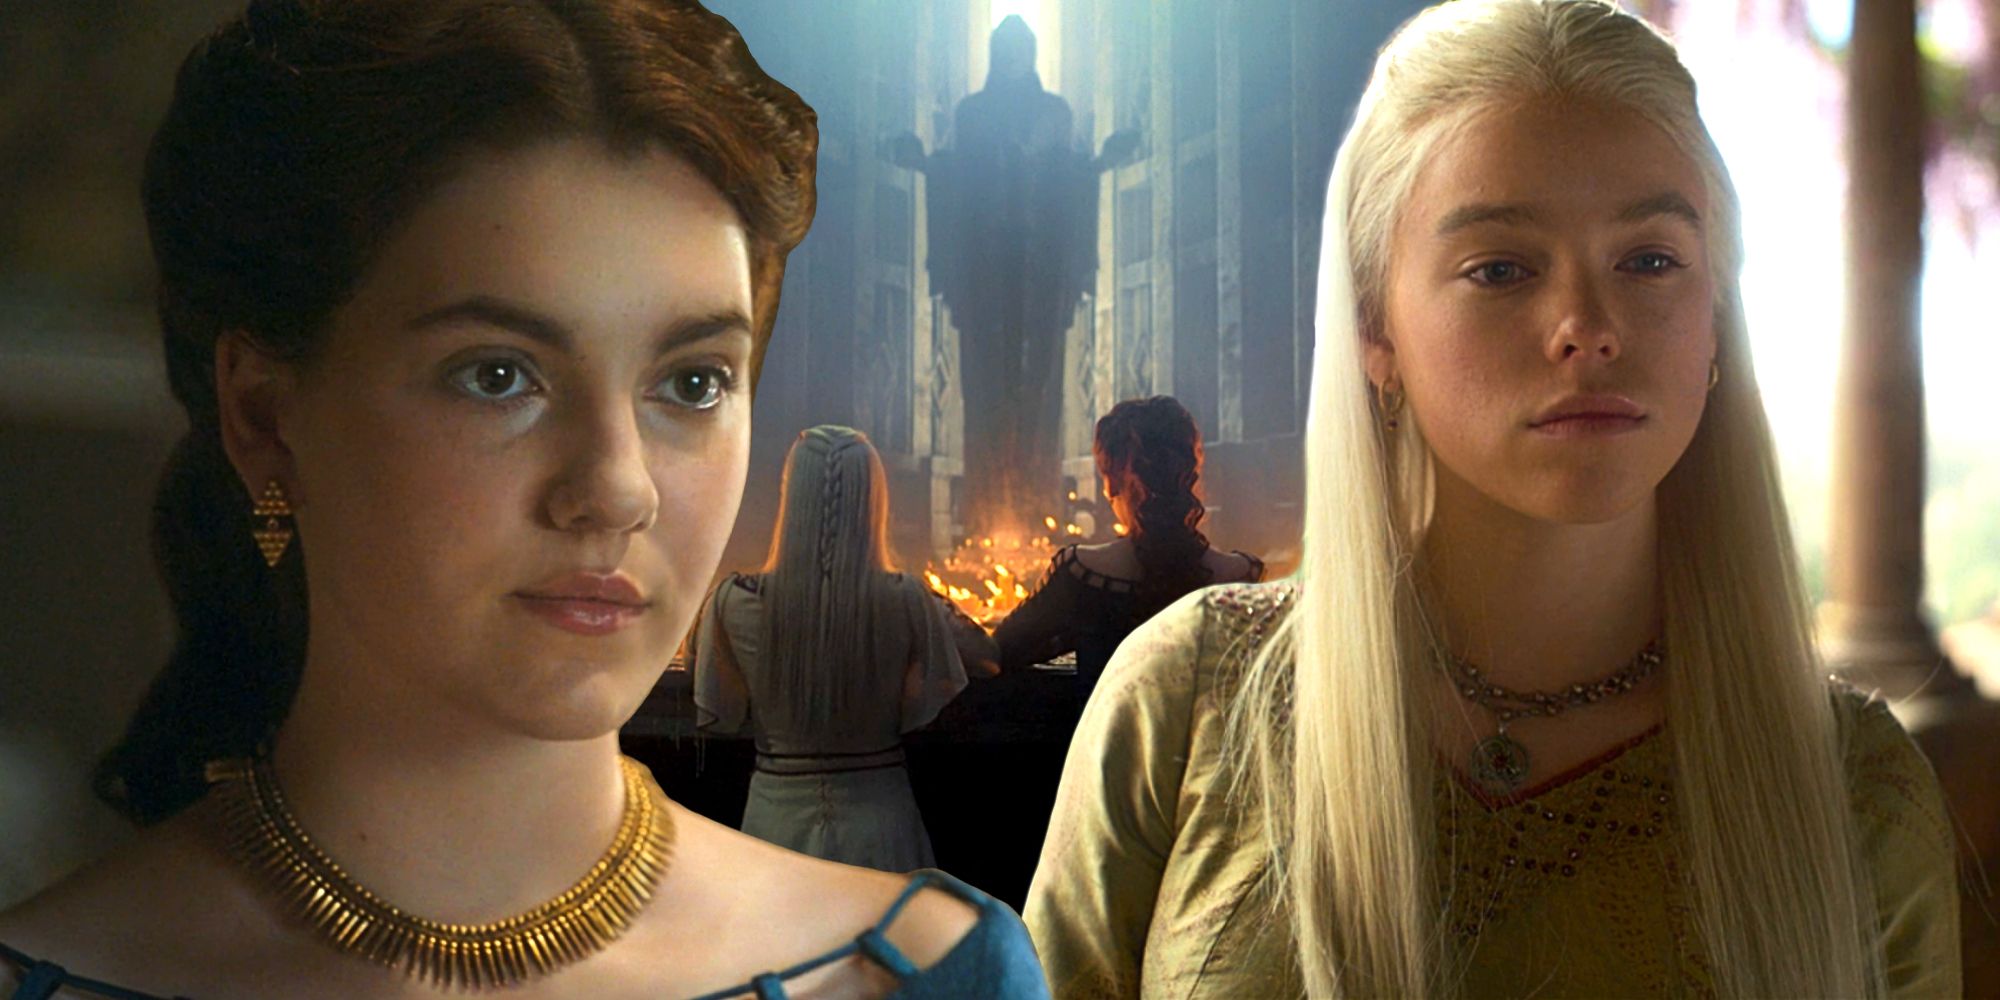 Emily Carey and Milly Alcock as Alicent Hightower and Rhaenyra Targaryen in House of the Dragon